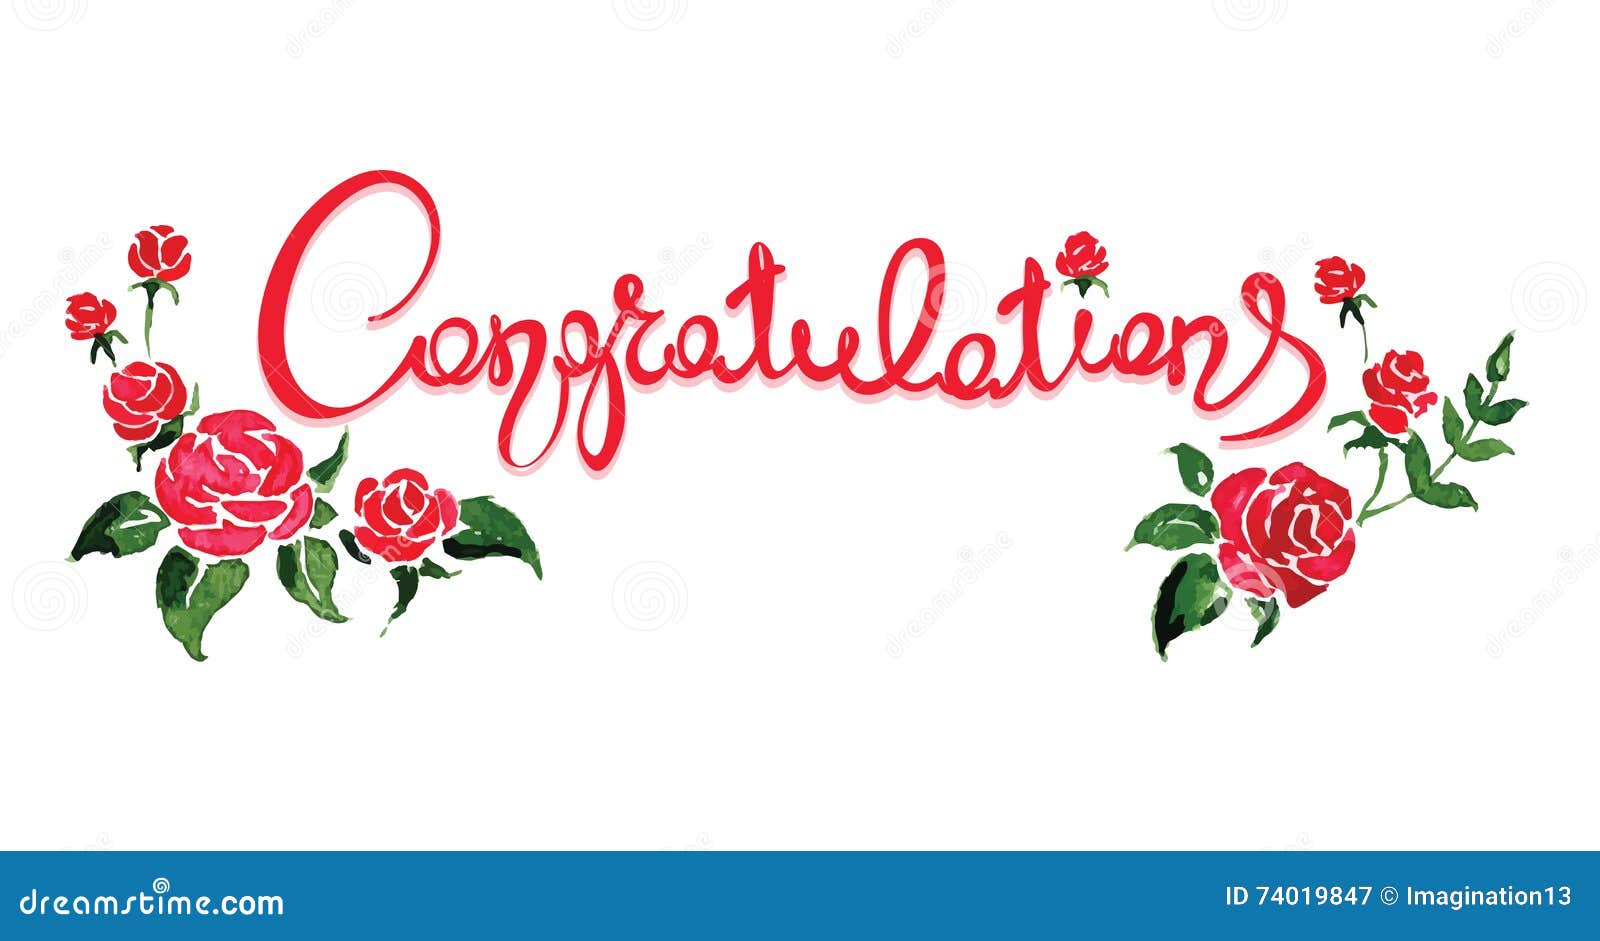 Congratulations with Flowers Stock Vector - Illustration of event, title:  74019847